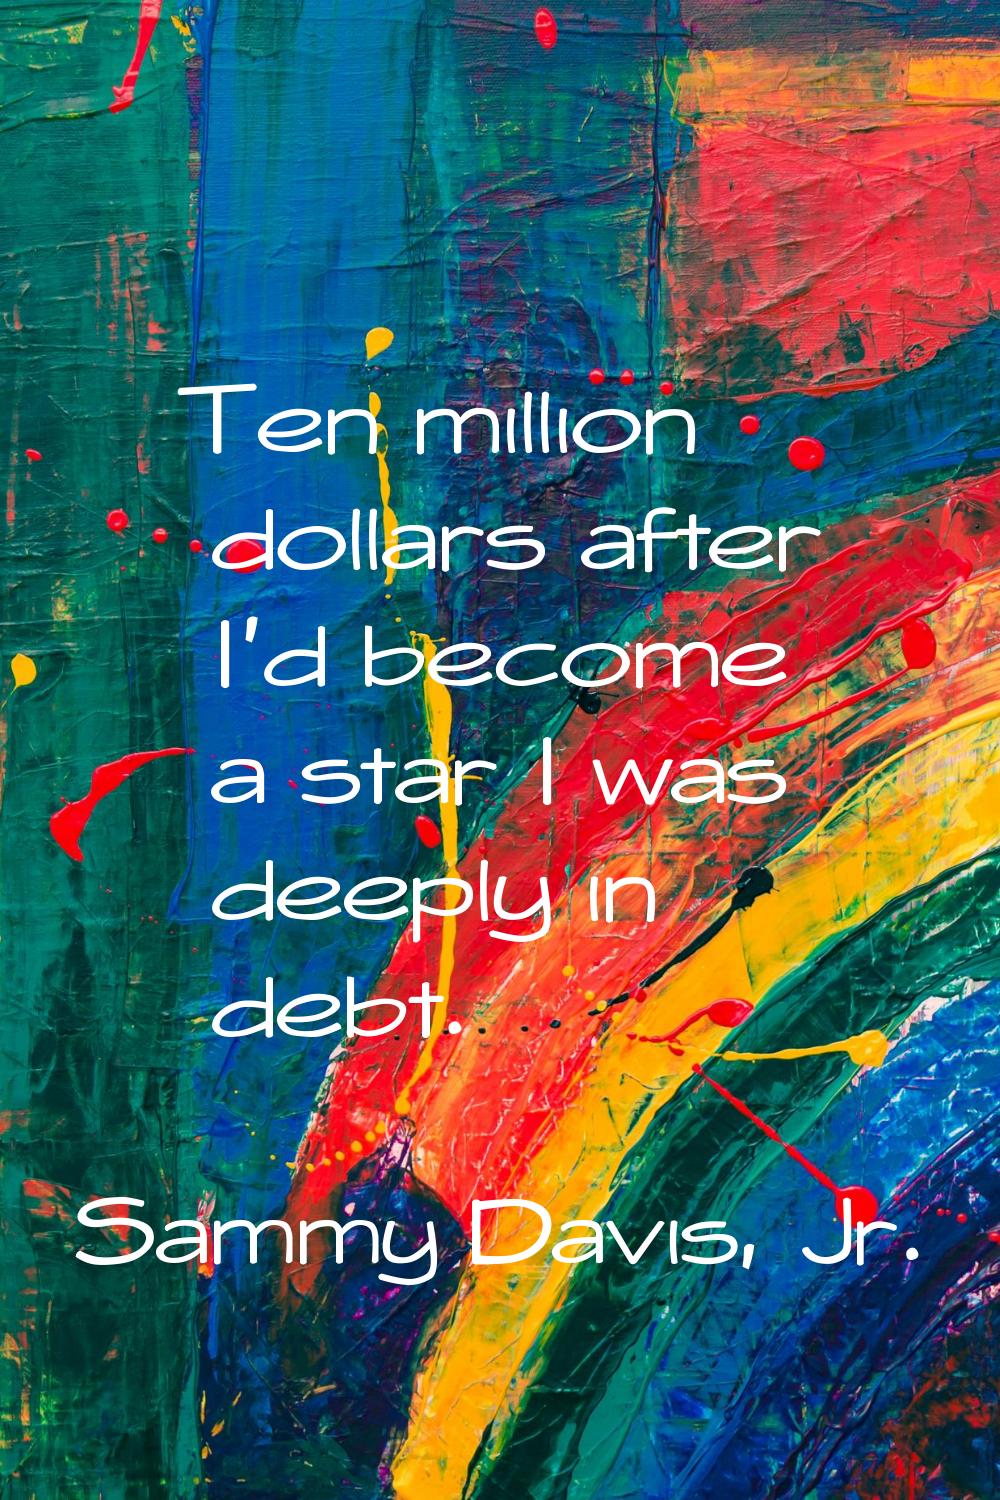 Ten million dollars after I'd become a star I was deeply in debt.